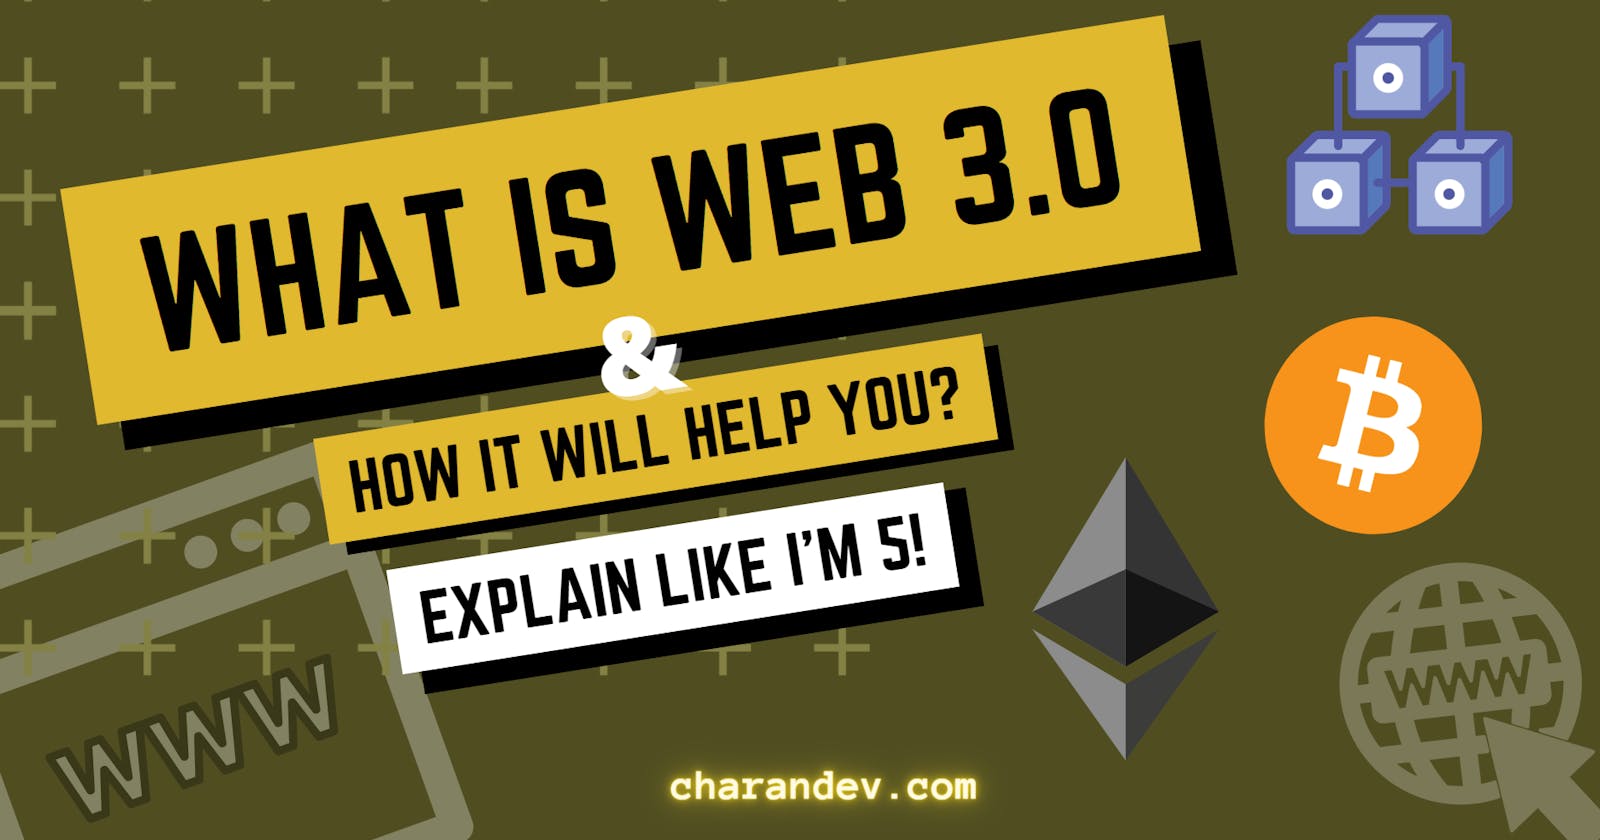 What is Web 3.0? How it will help you? Explain Like I'm 5.